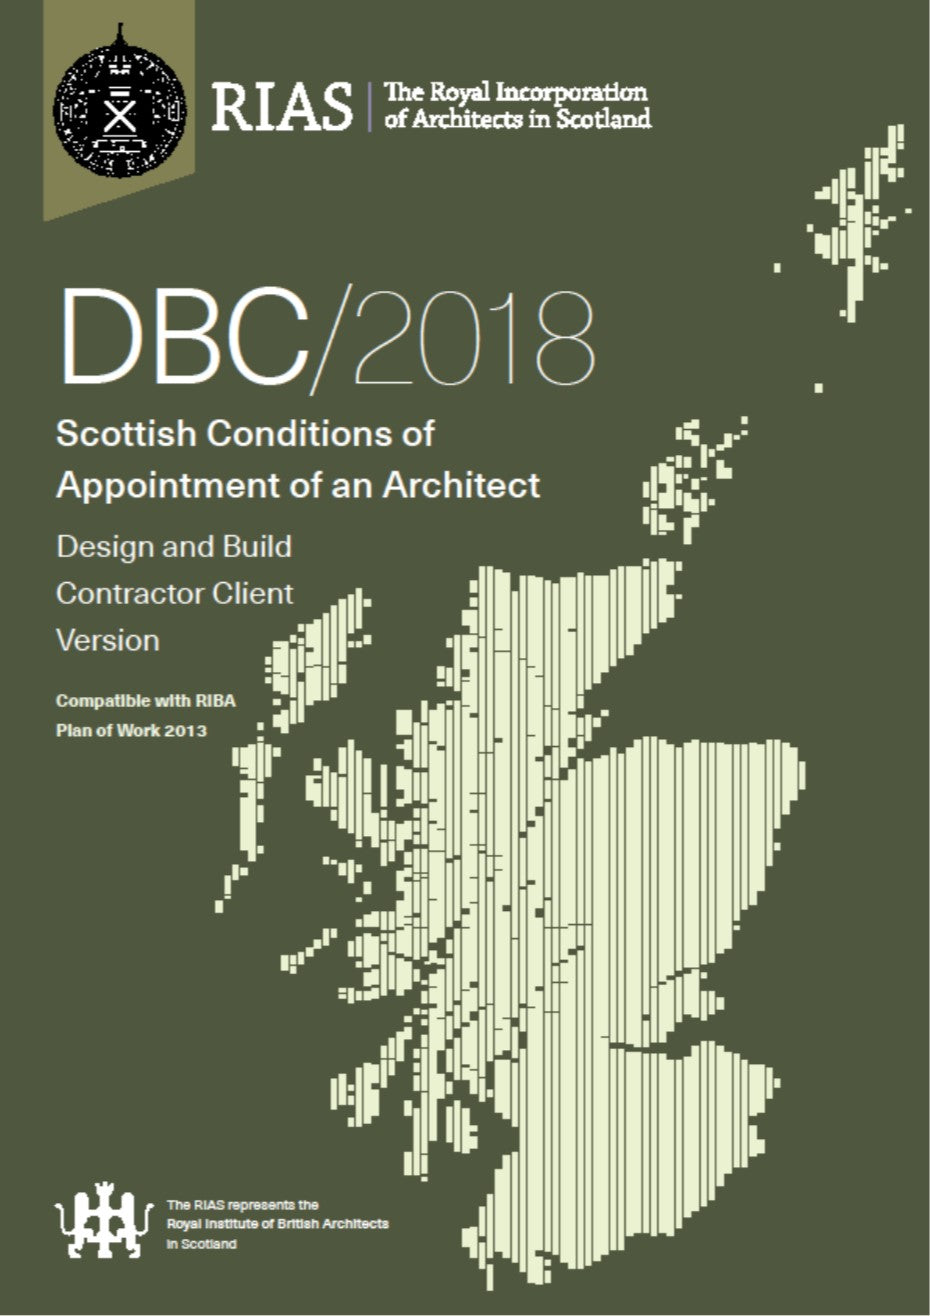 Scottish Design & Build Contractor Client Form of Appointment DBC/2018